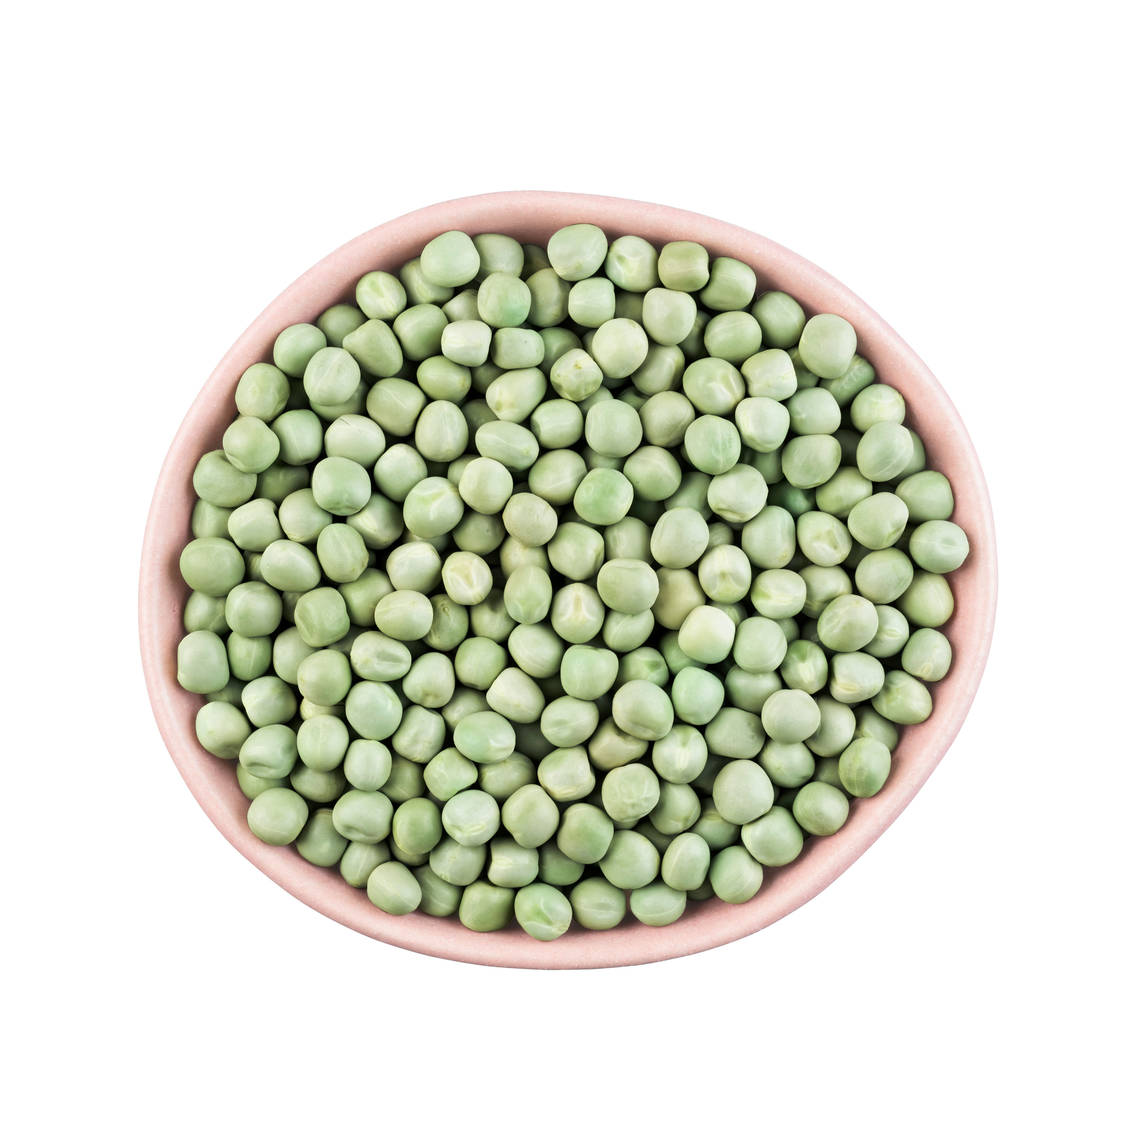 Dry peas can be used in a variety of different ways in modern cuisine. 